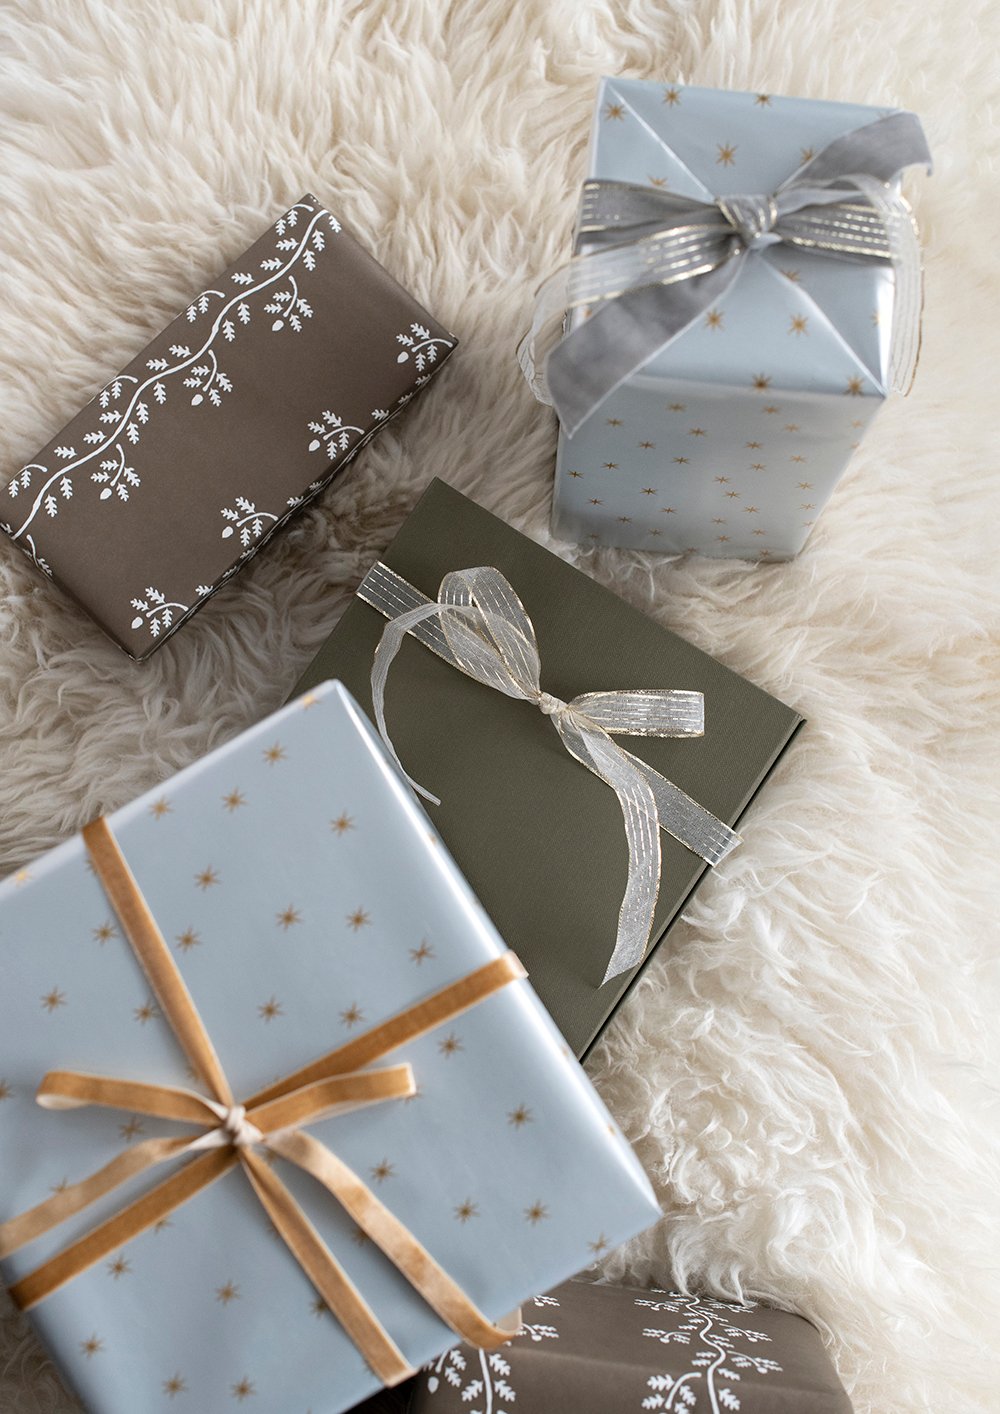 Holiday Gift Wrap Ideas - Room for Tuesday